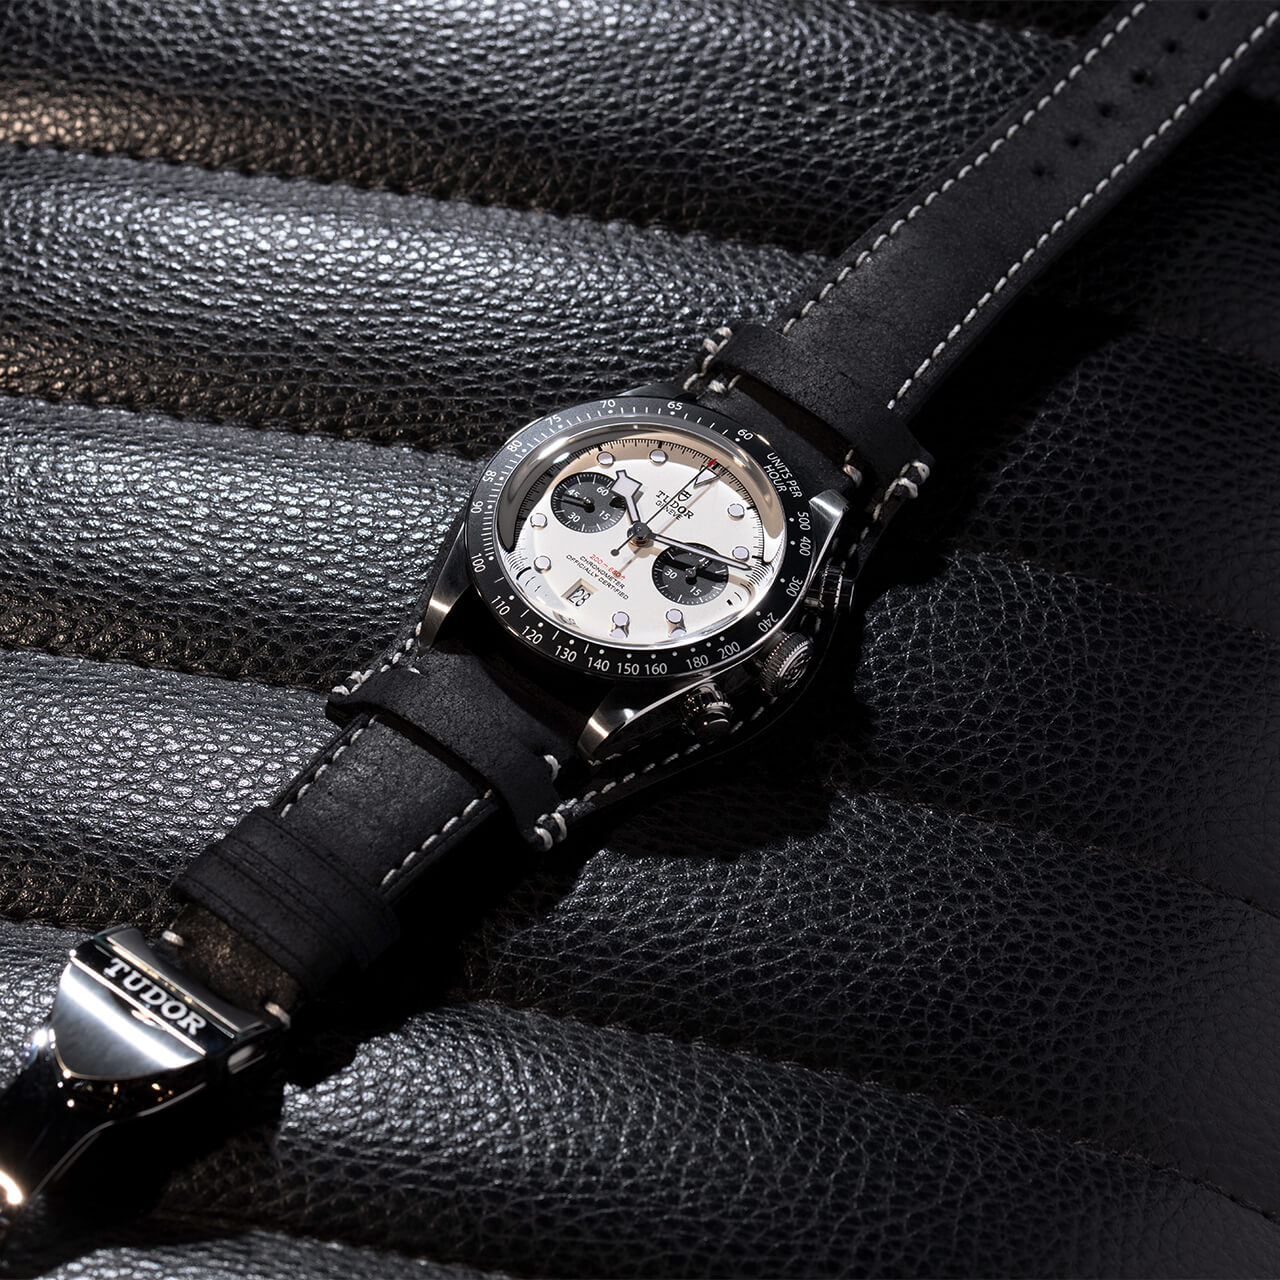 A black leather strap sits on top of a black leather watch.